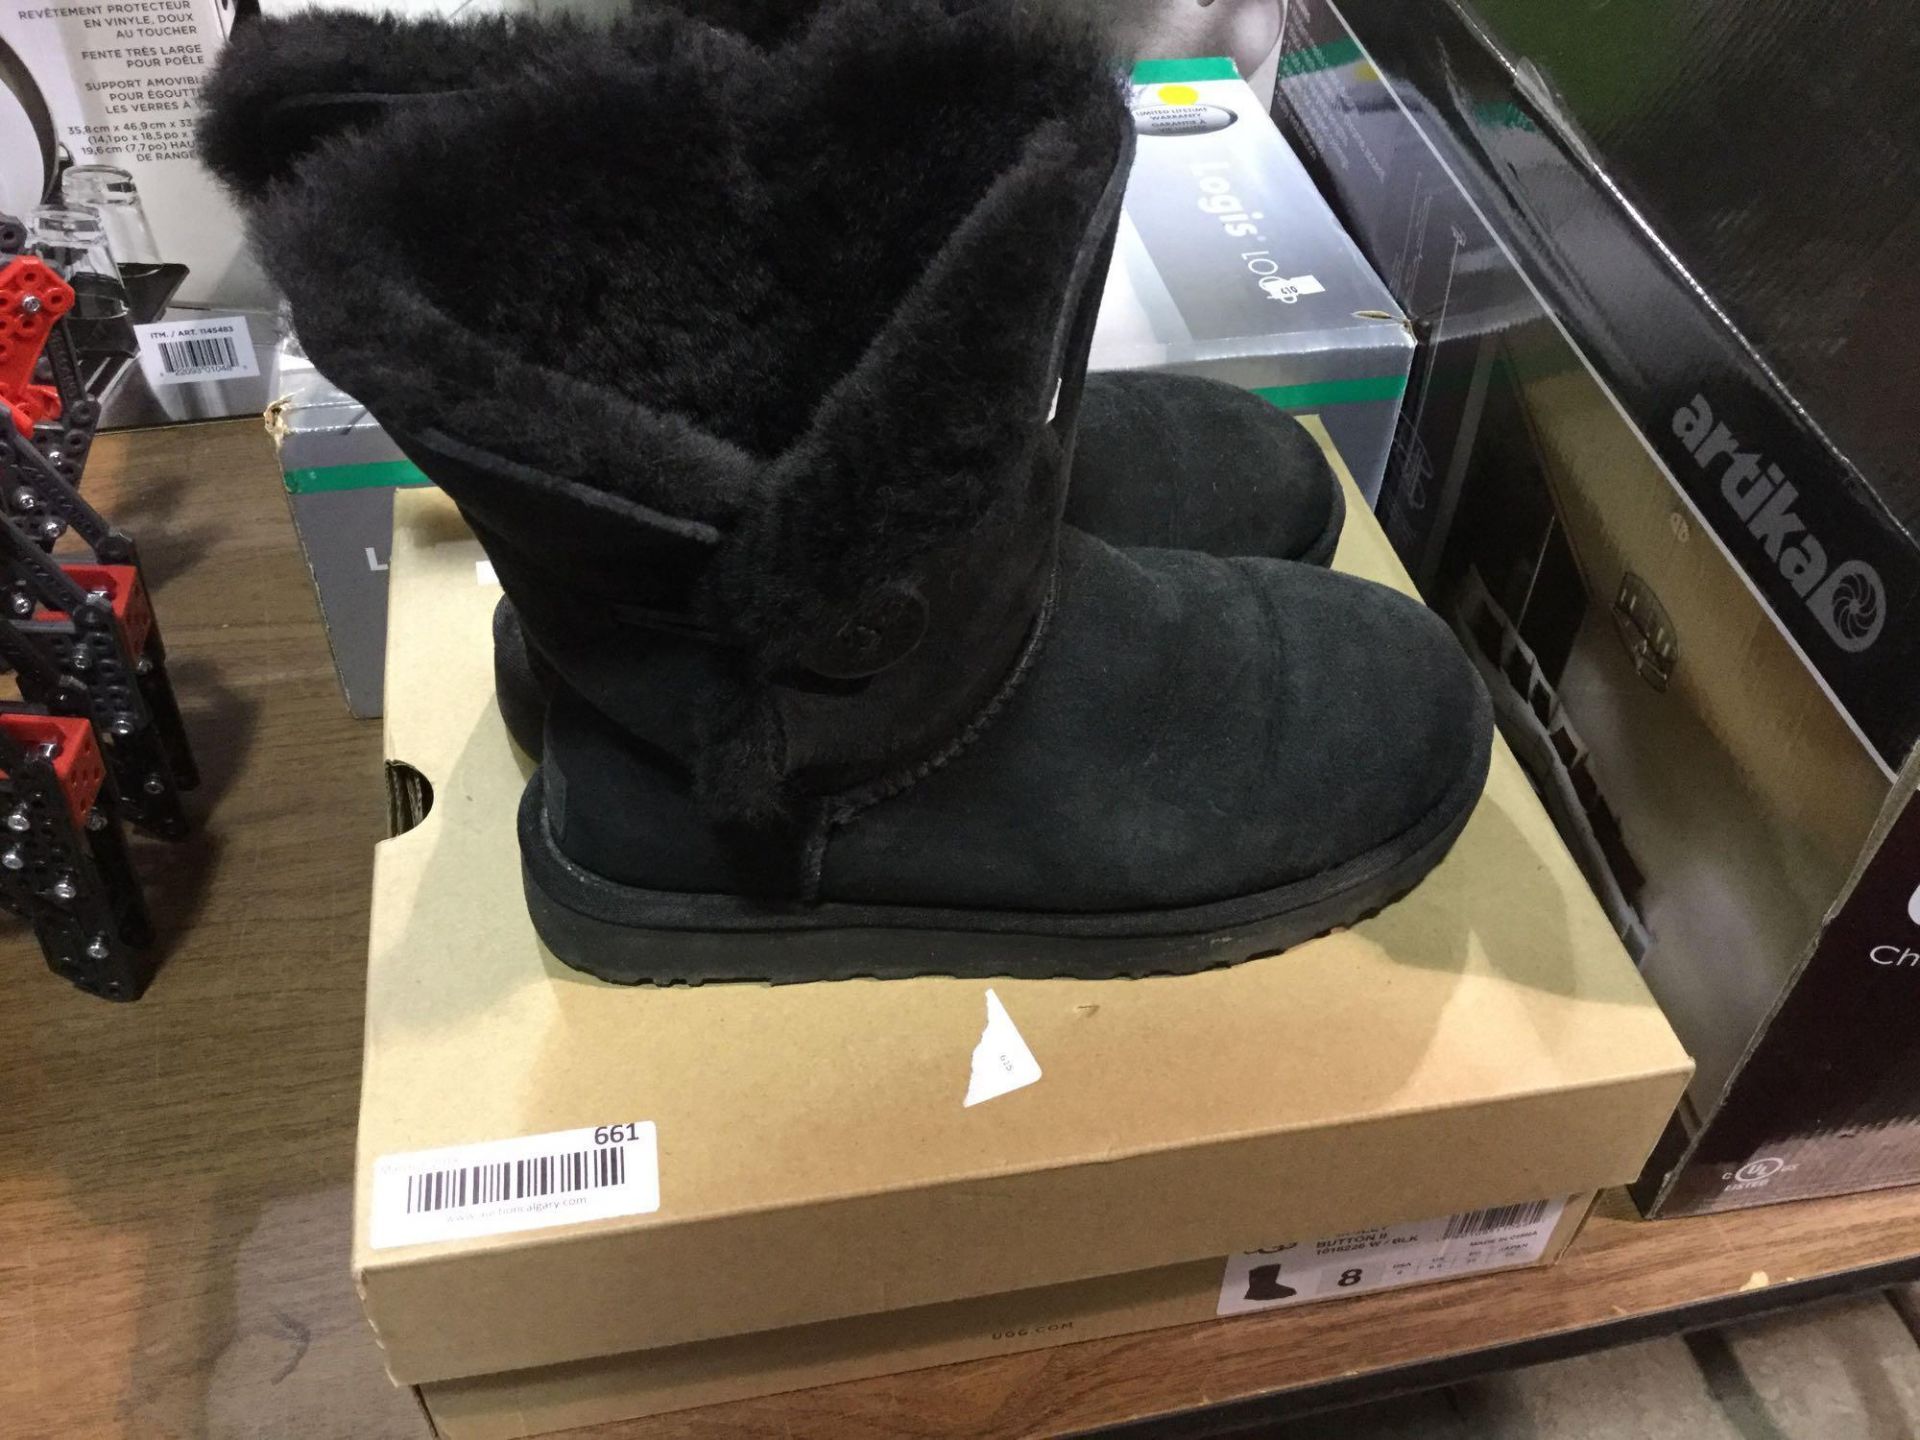 Uggs Ladies' Size 8 Boots